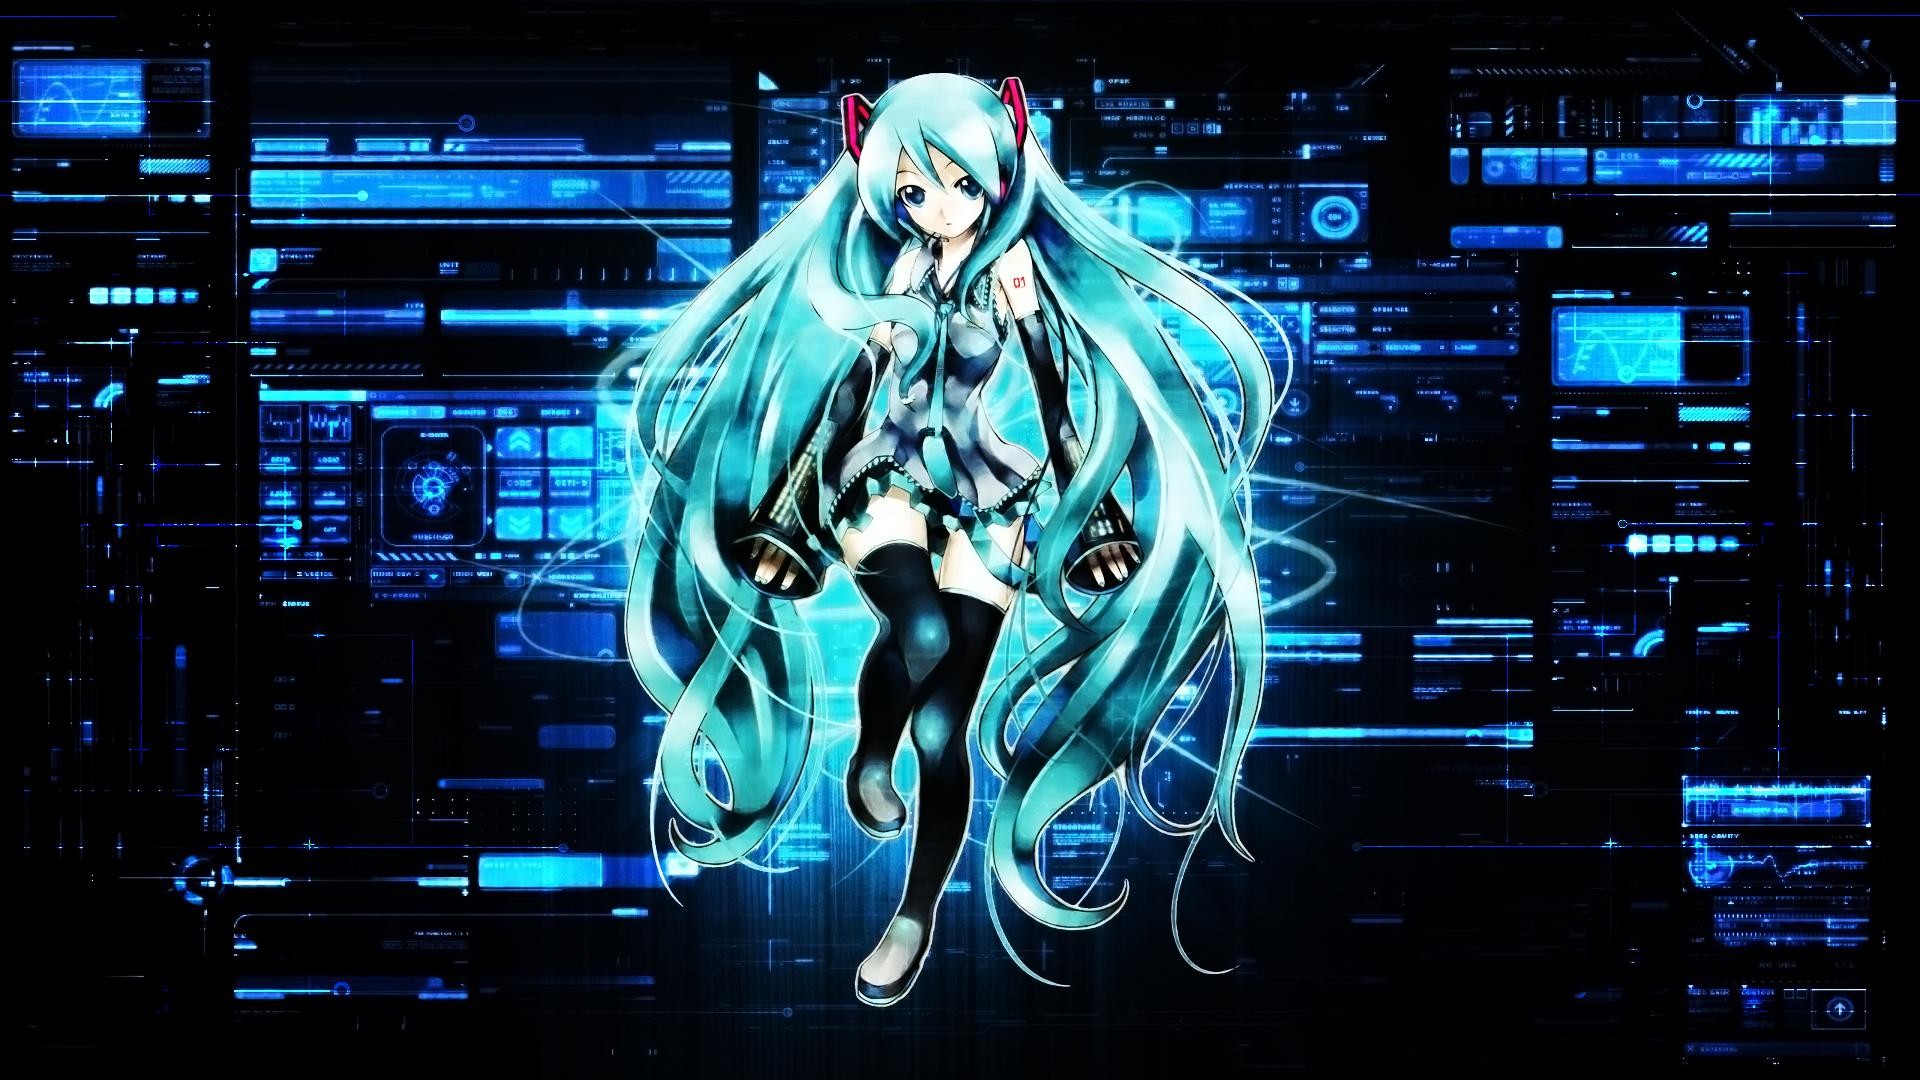 1920x1080 Hatsune Miku Wallpaper by Eiswolfi on DeviantArt | HD Wallpapers |  Pinterest | Hatsune miku, Wallpaper and Wallpaper backgrounds